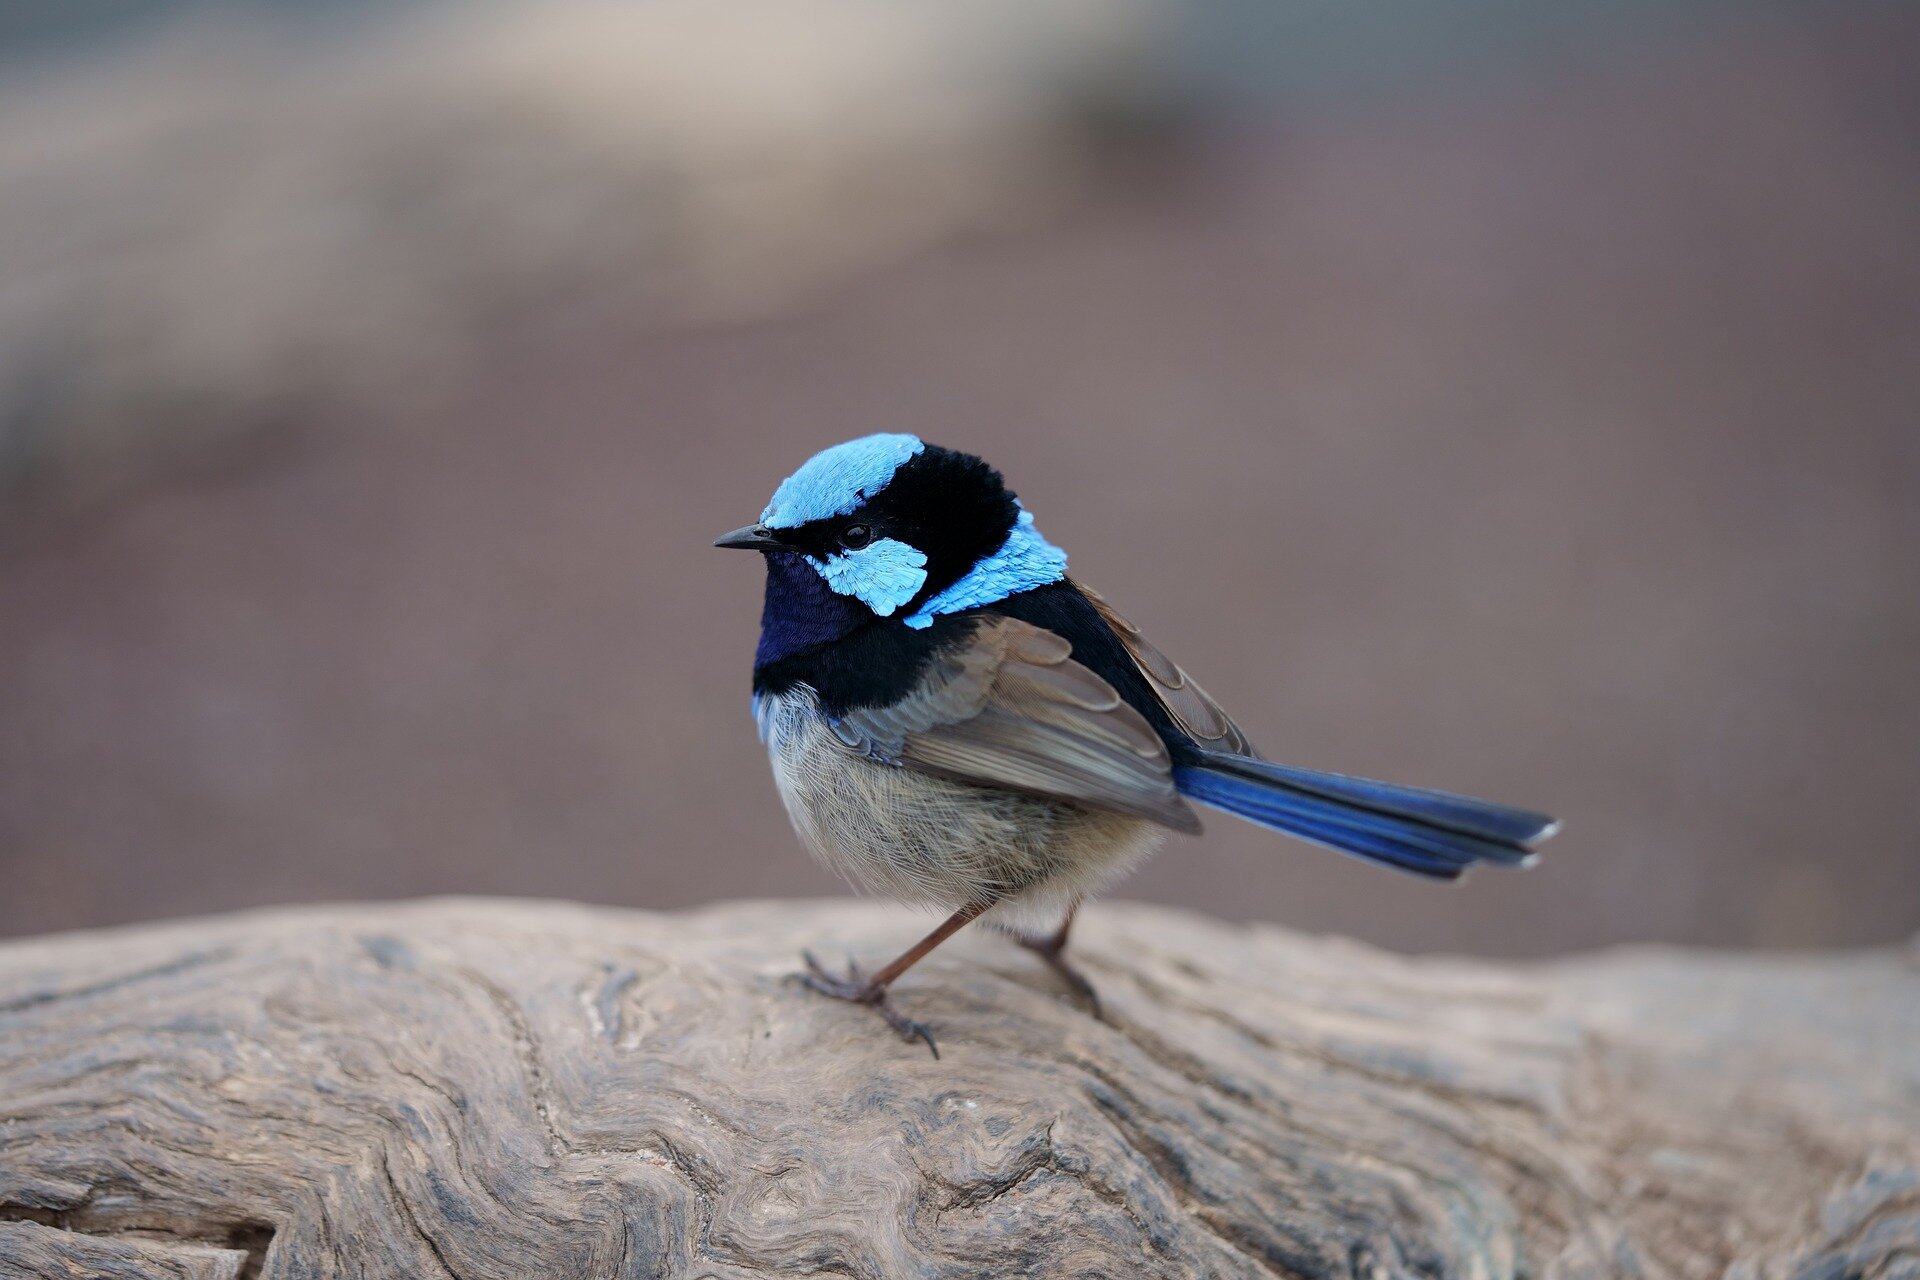 Fairy-wrens are more likely to help a mate in the harsh of winter, ornithologists find